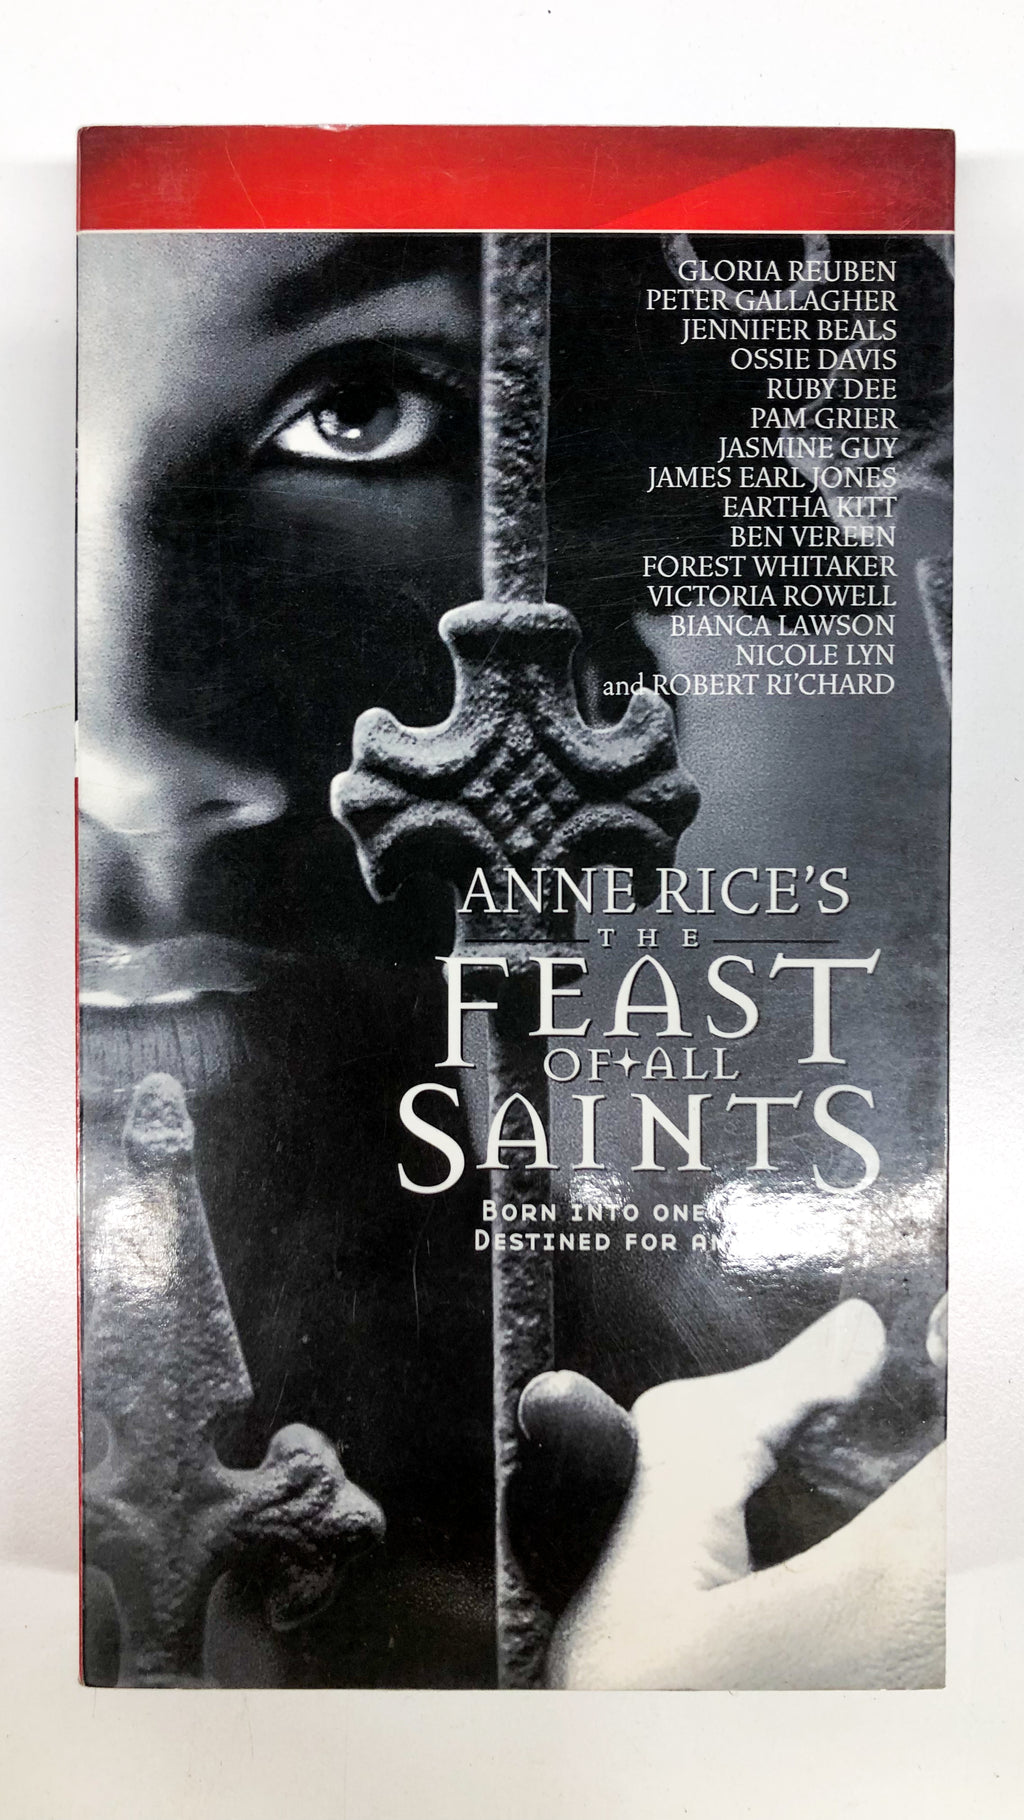 Anne Rice's Feast of all Saints